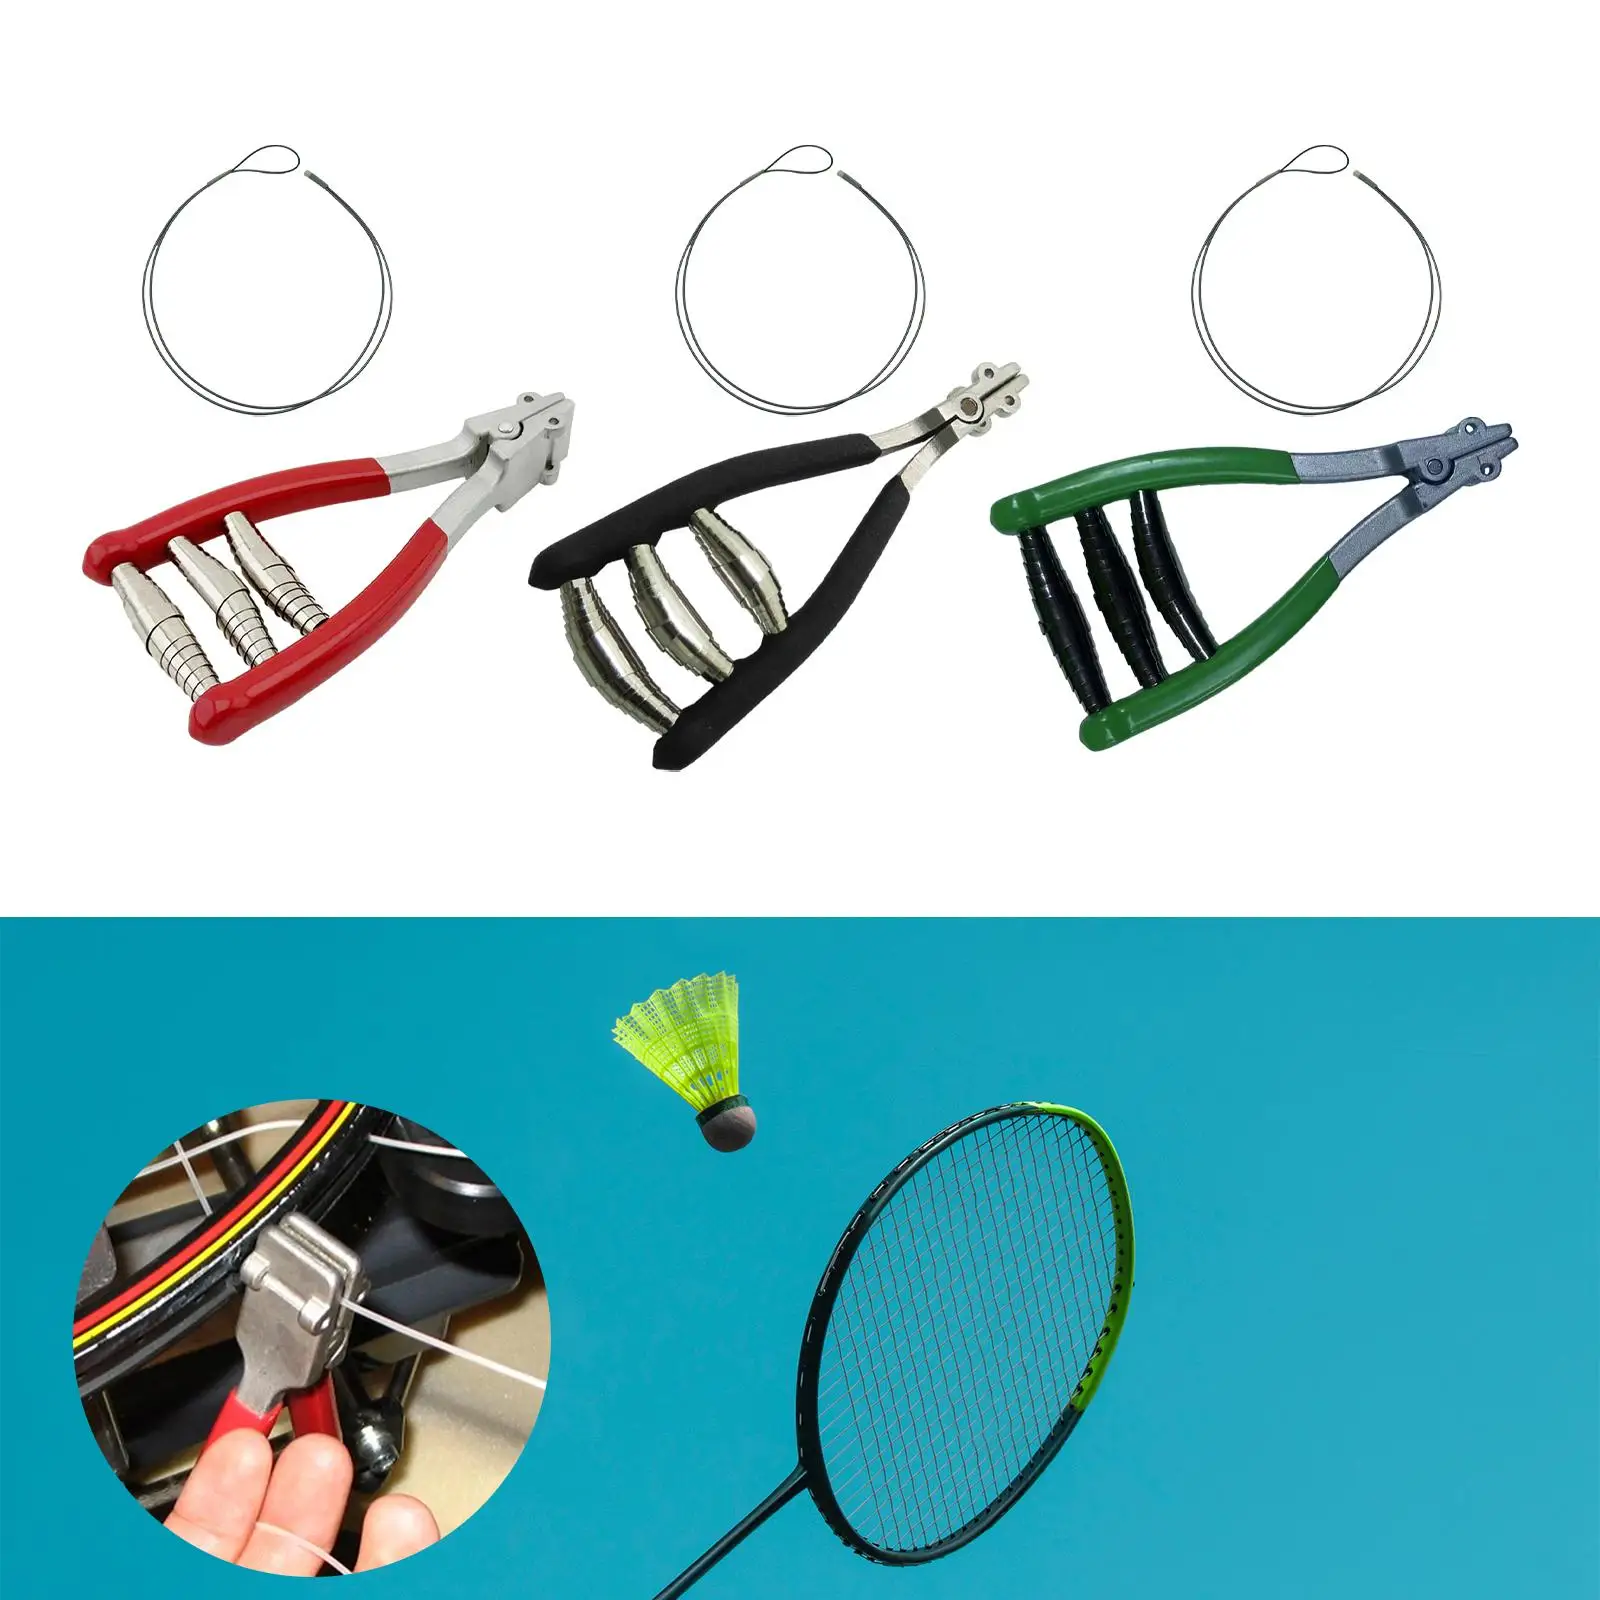 Sports Starting Clamp Badminton Stringing Clamp Sports Durable Manual Tennis Equipment for Tennis Racquet Badminton Accessories